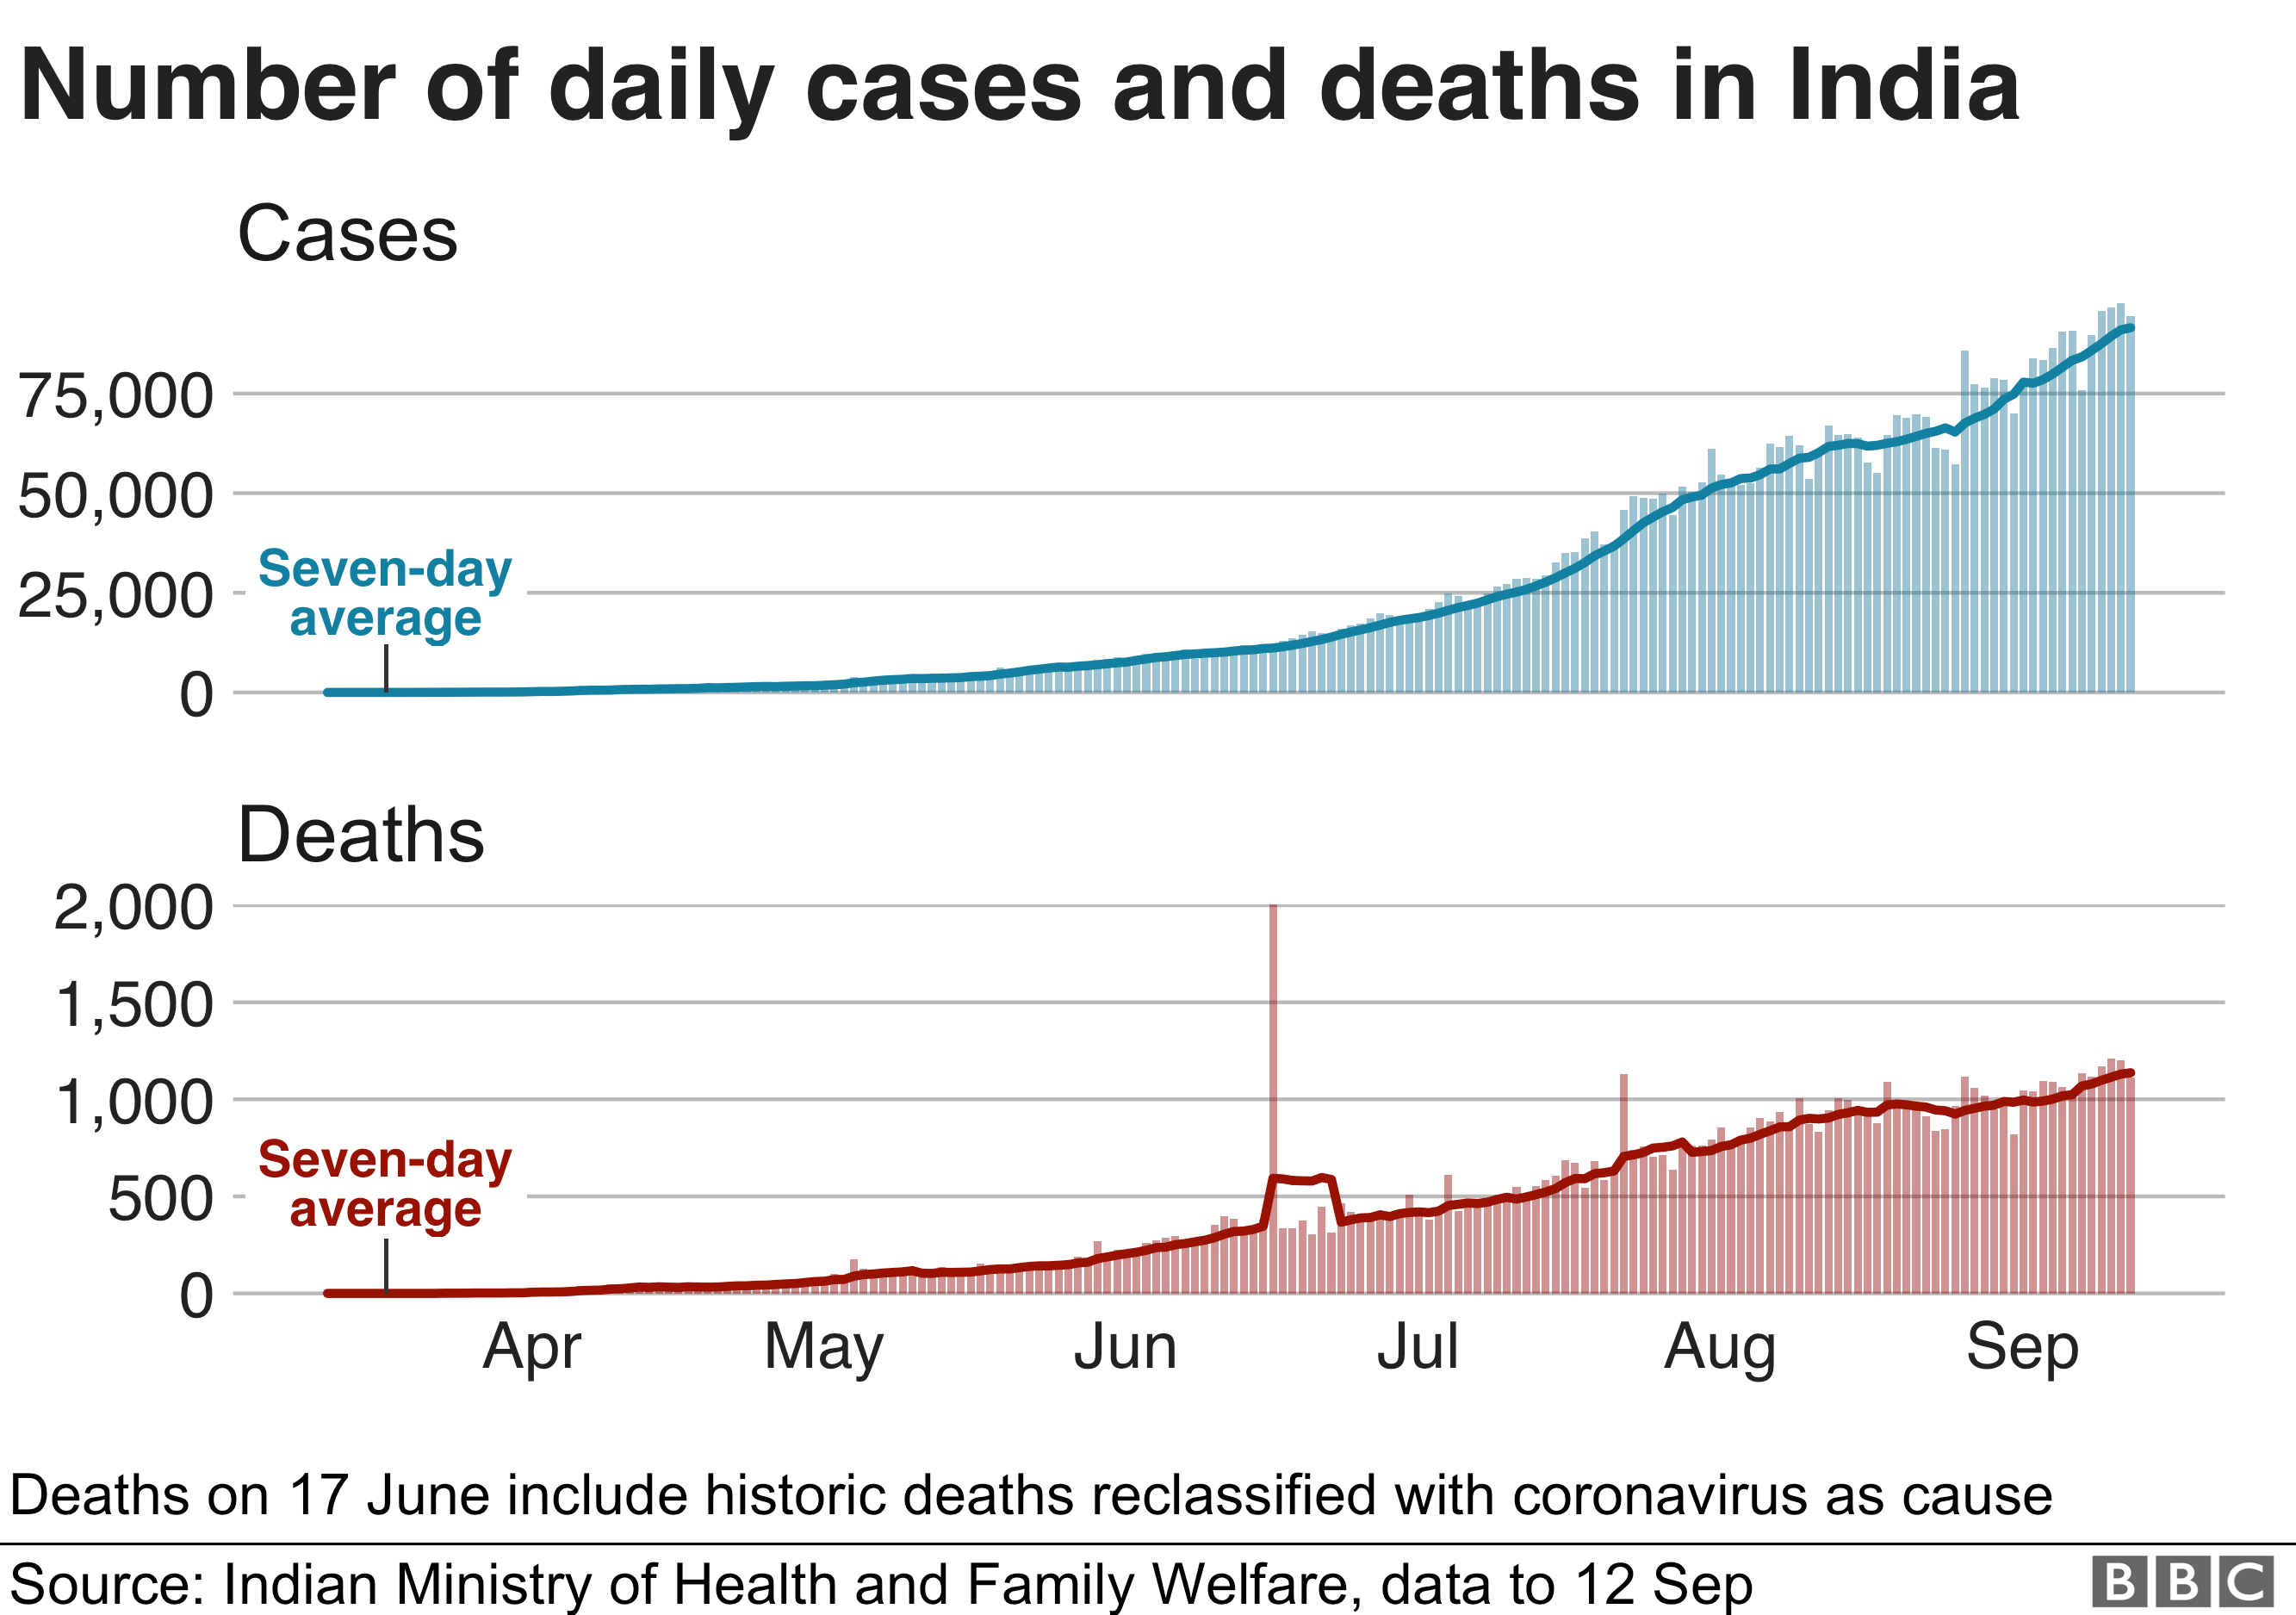 Charts shows daily cases and deaths in India are still rising